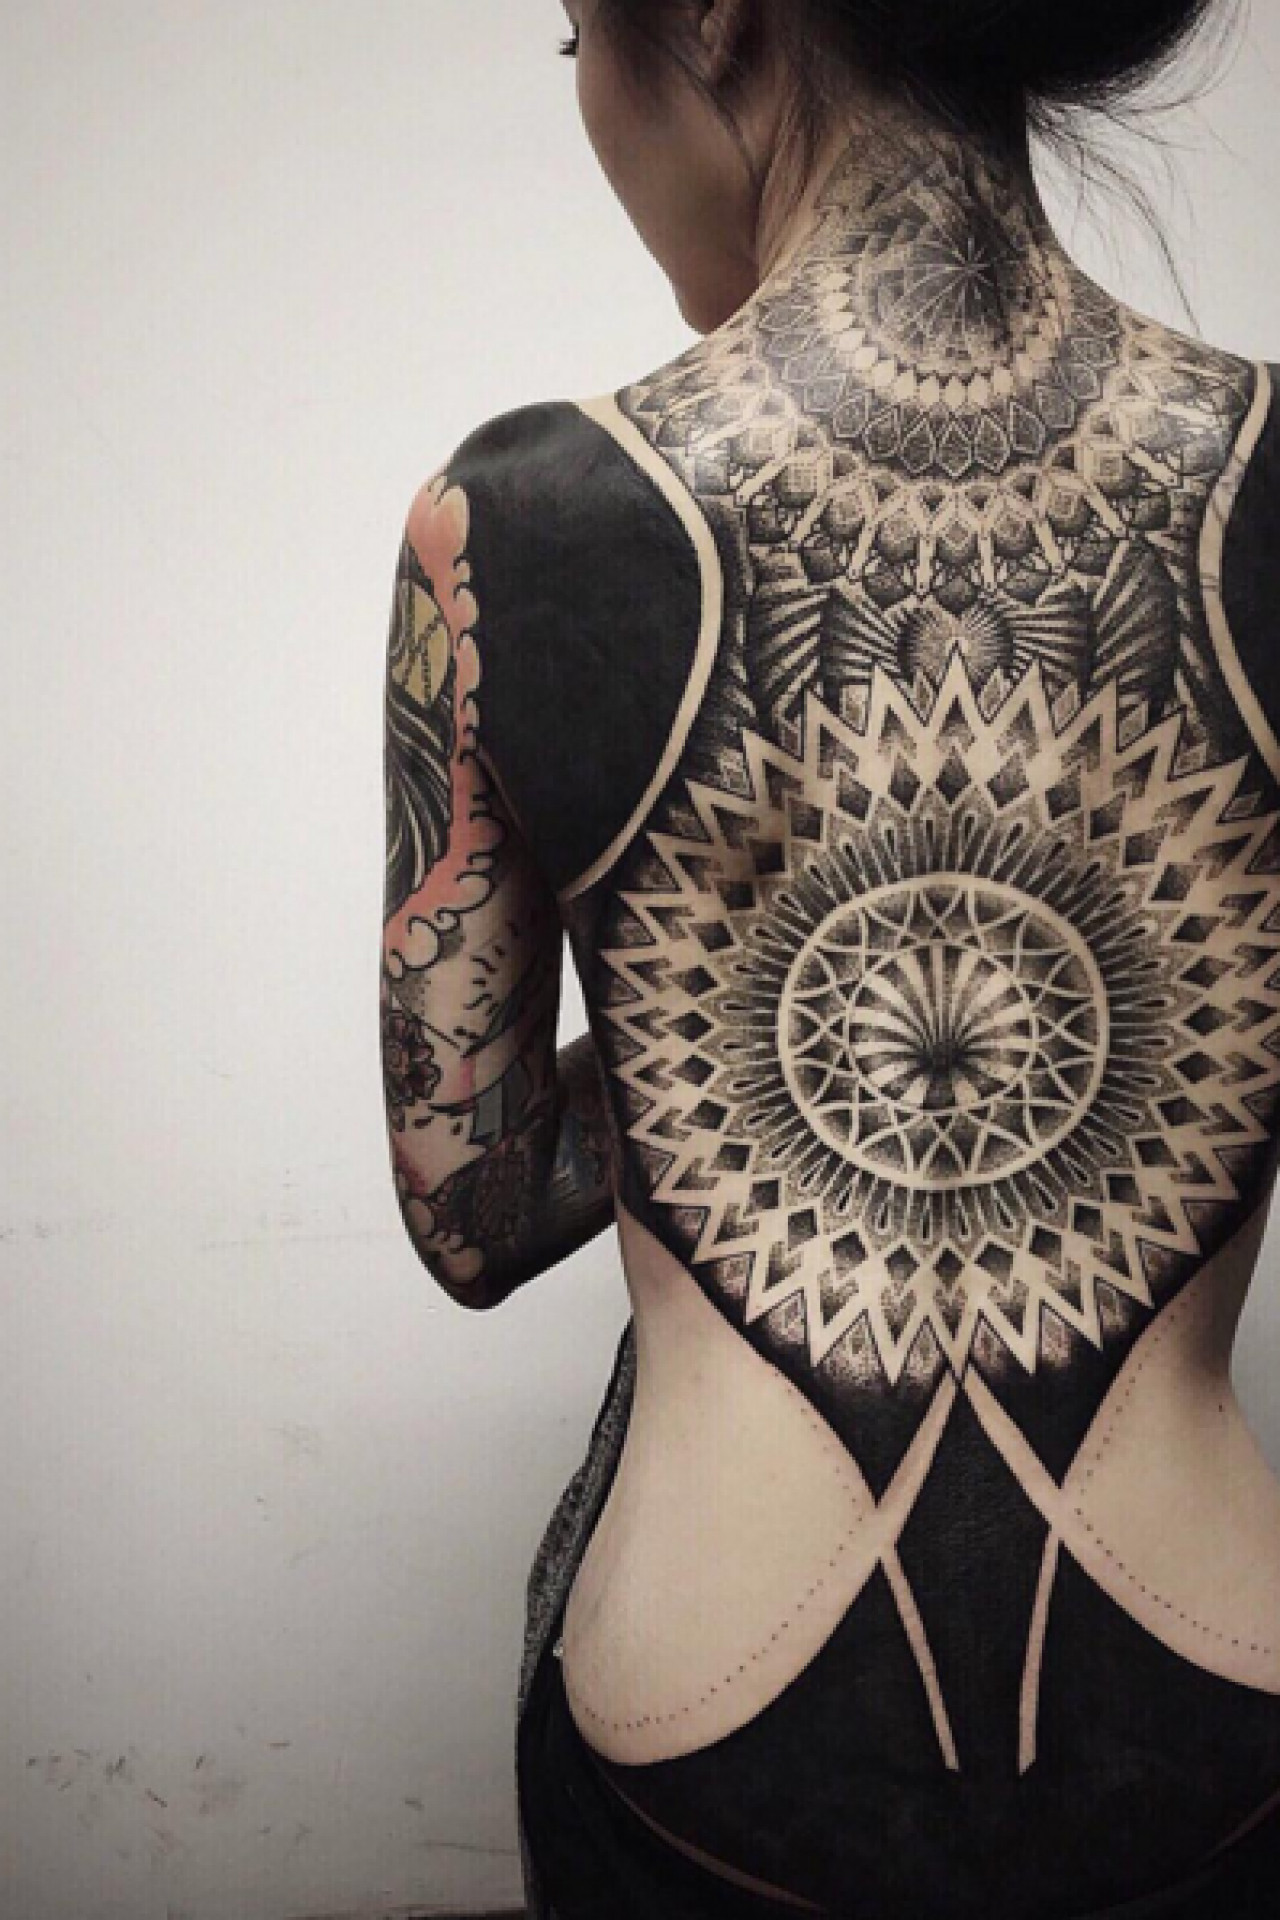 15 Breathtakingly Beautiful Pictures of Blackout Tattoos